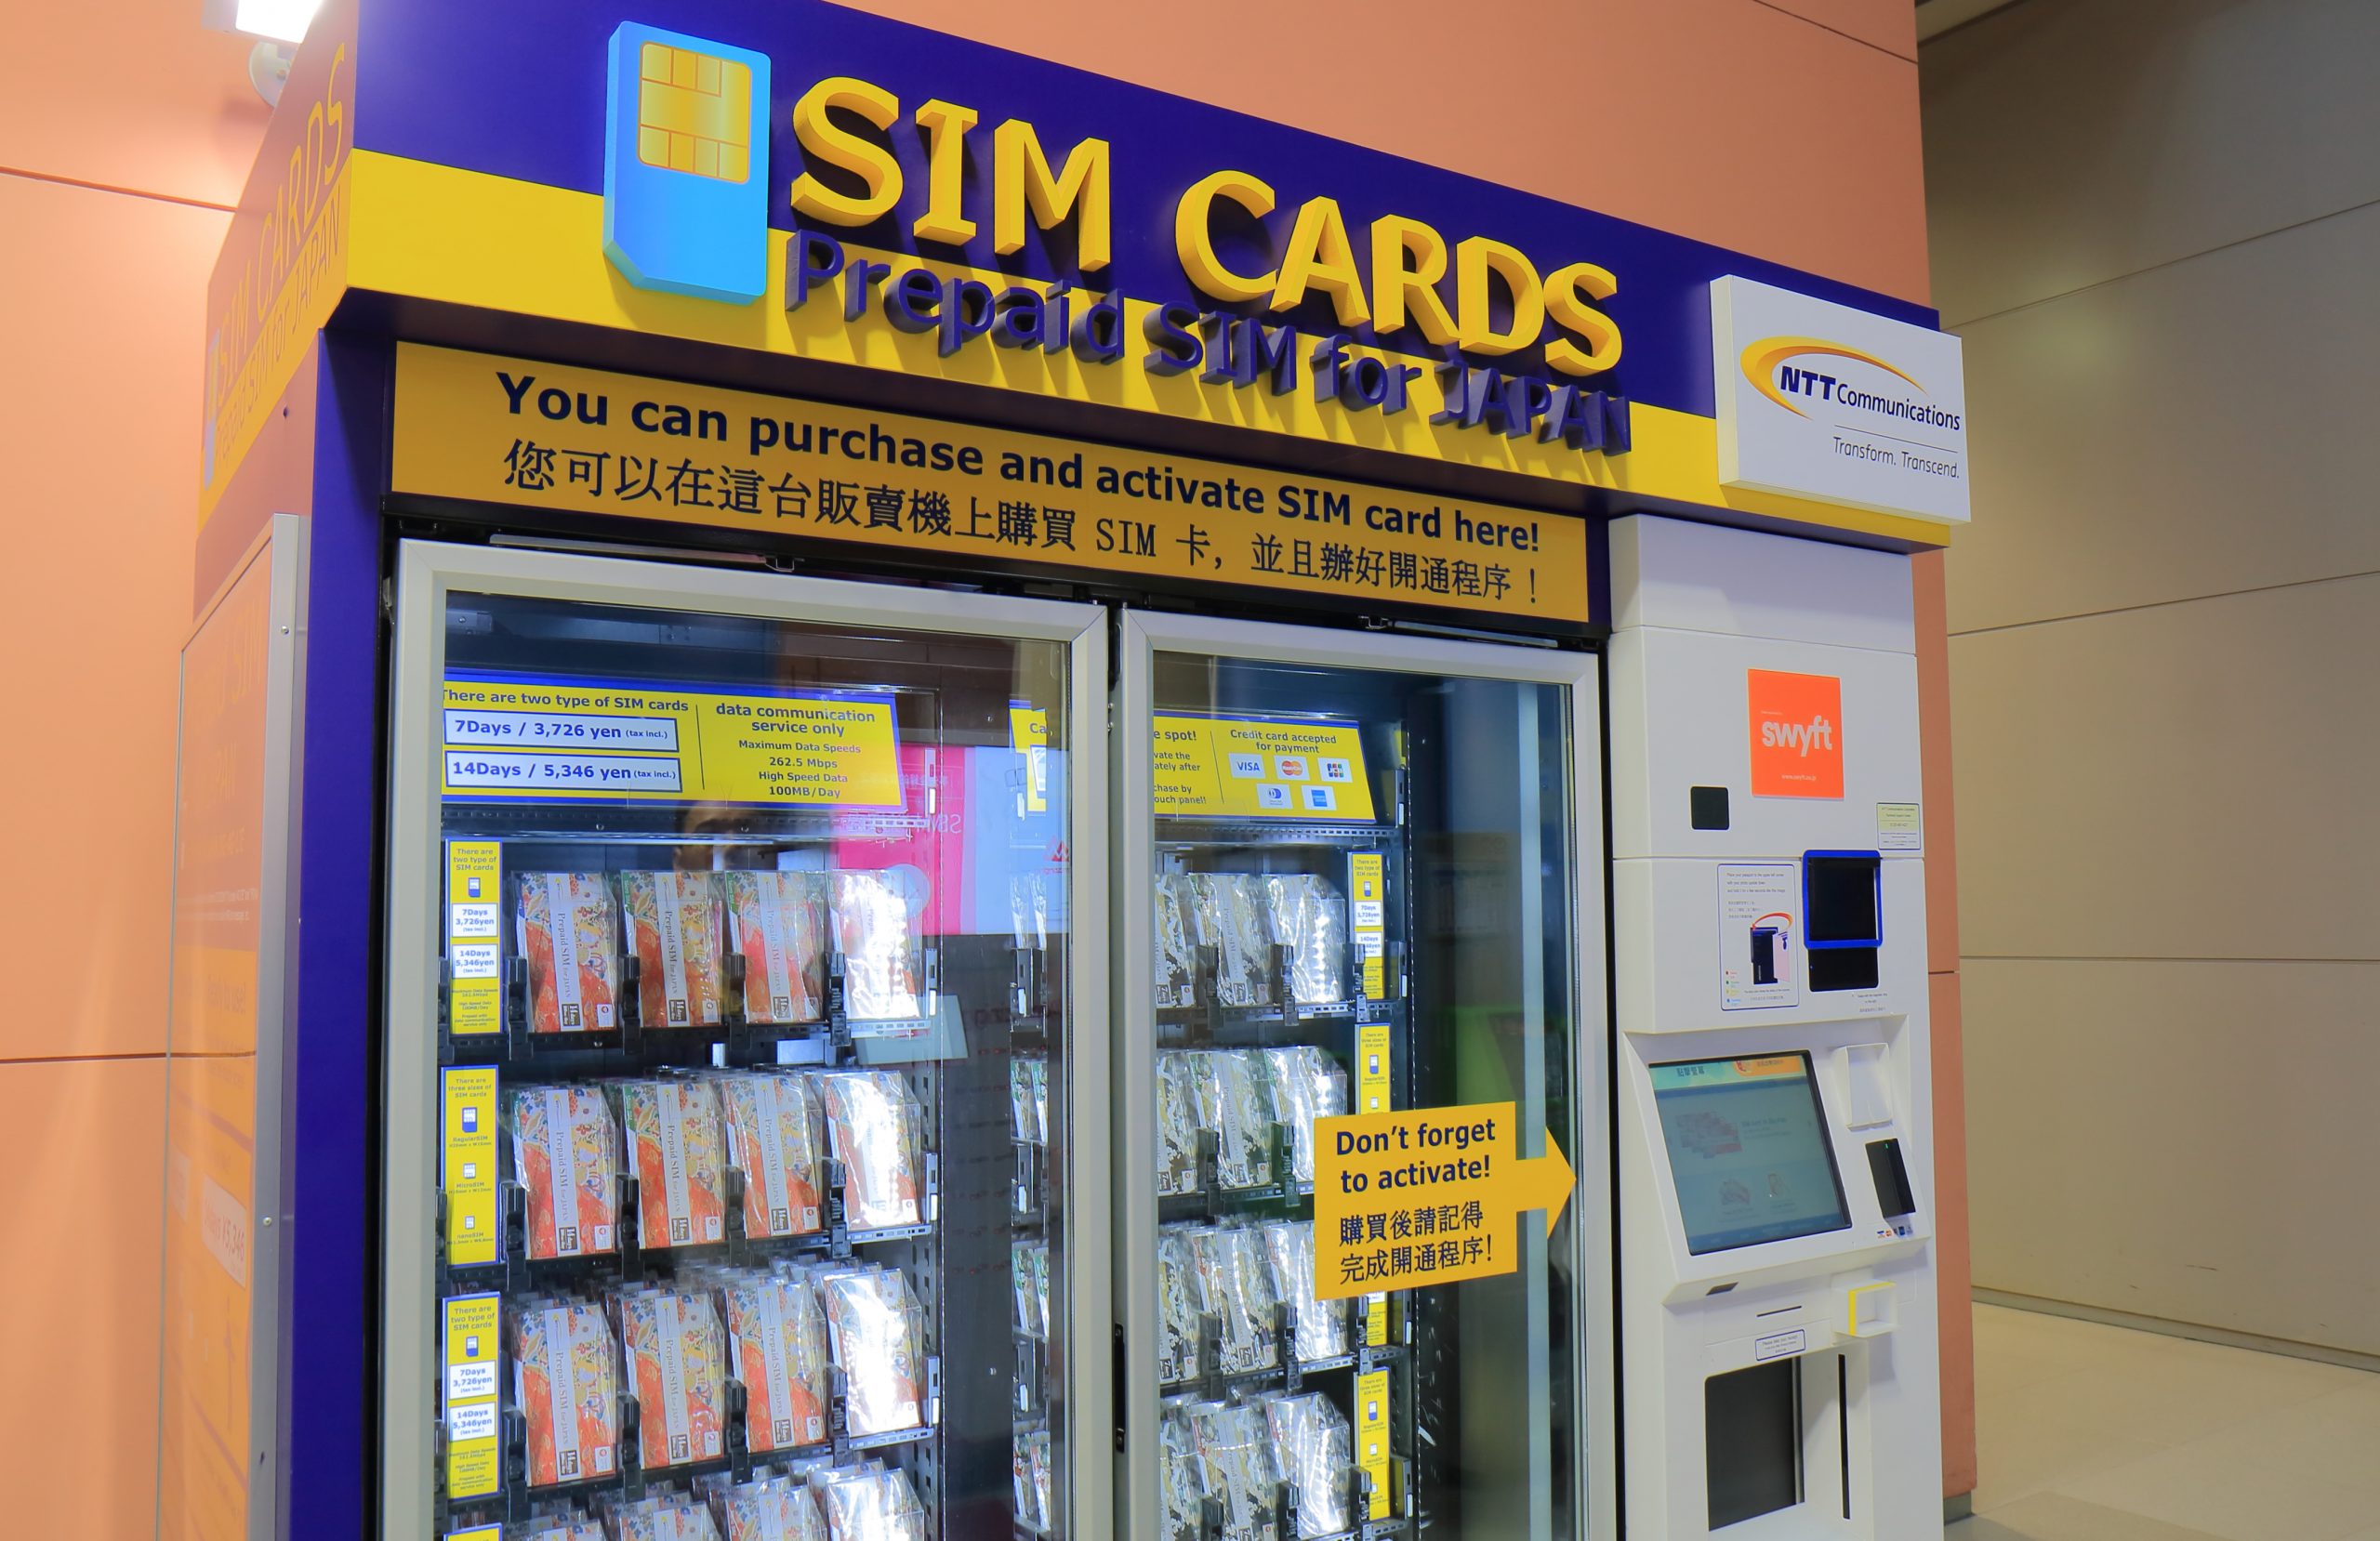 SIM cards are now sold in vending machines